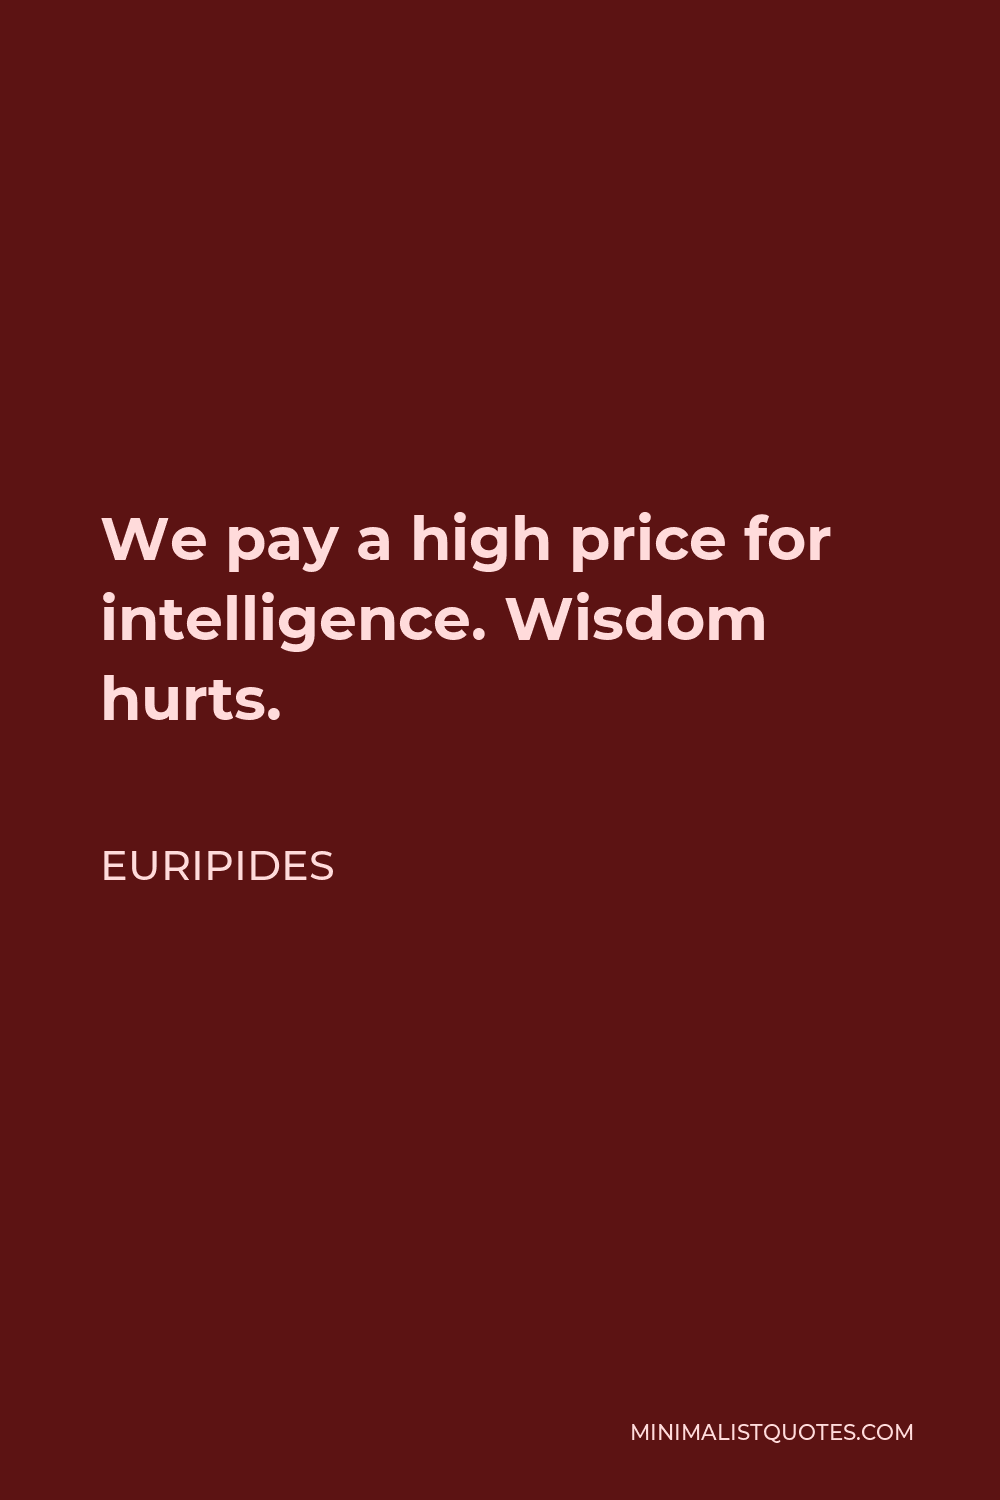 Euripides Quote - We pay a high price for intelligence. Wisdom hurts.